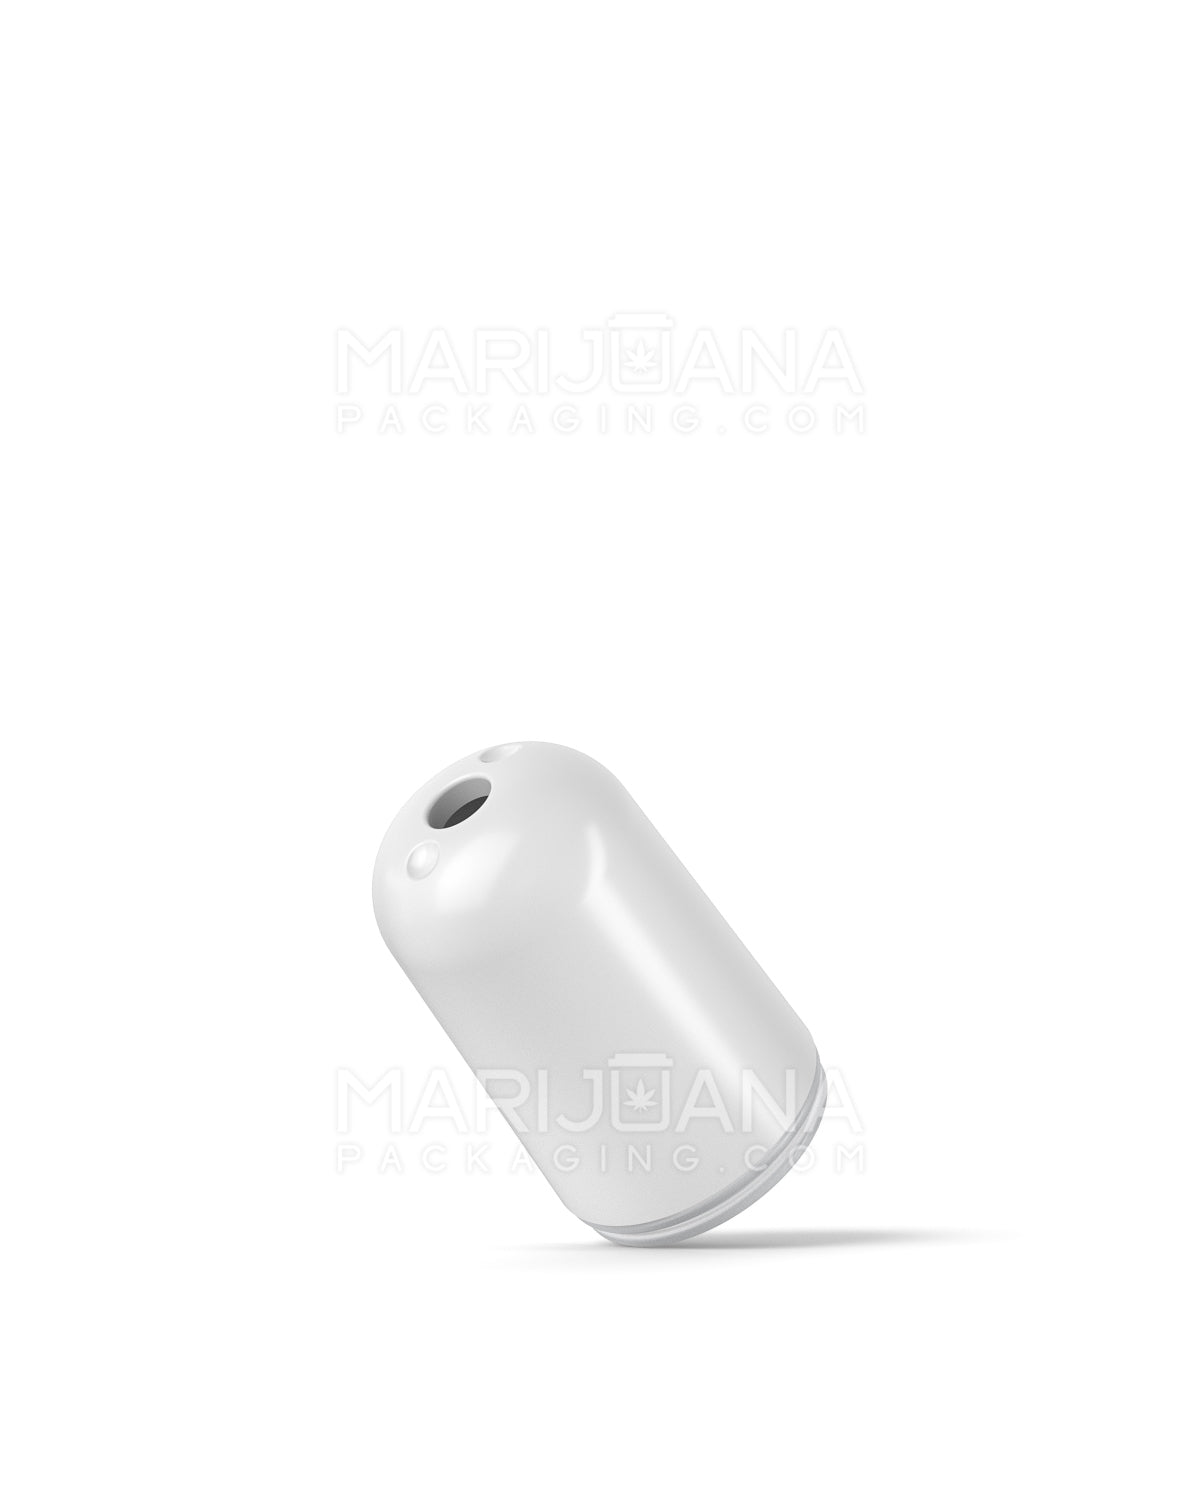 AVD | Round Vape Mouthpiece for Glass Cartridges | White Plastic - Screw On - 600 Count - 4